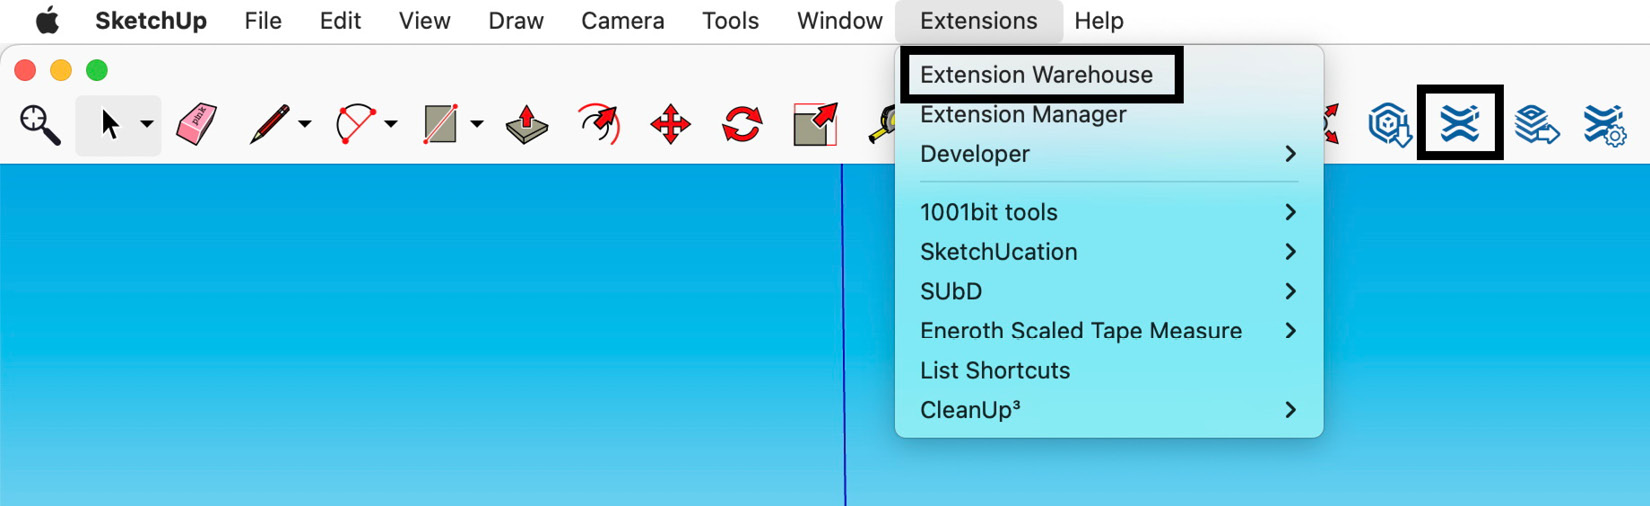 Figure 12.14 – The Extension Warehouse window can be accessed from the toolbar or menu
